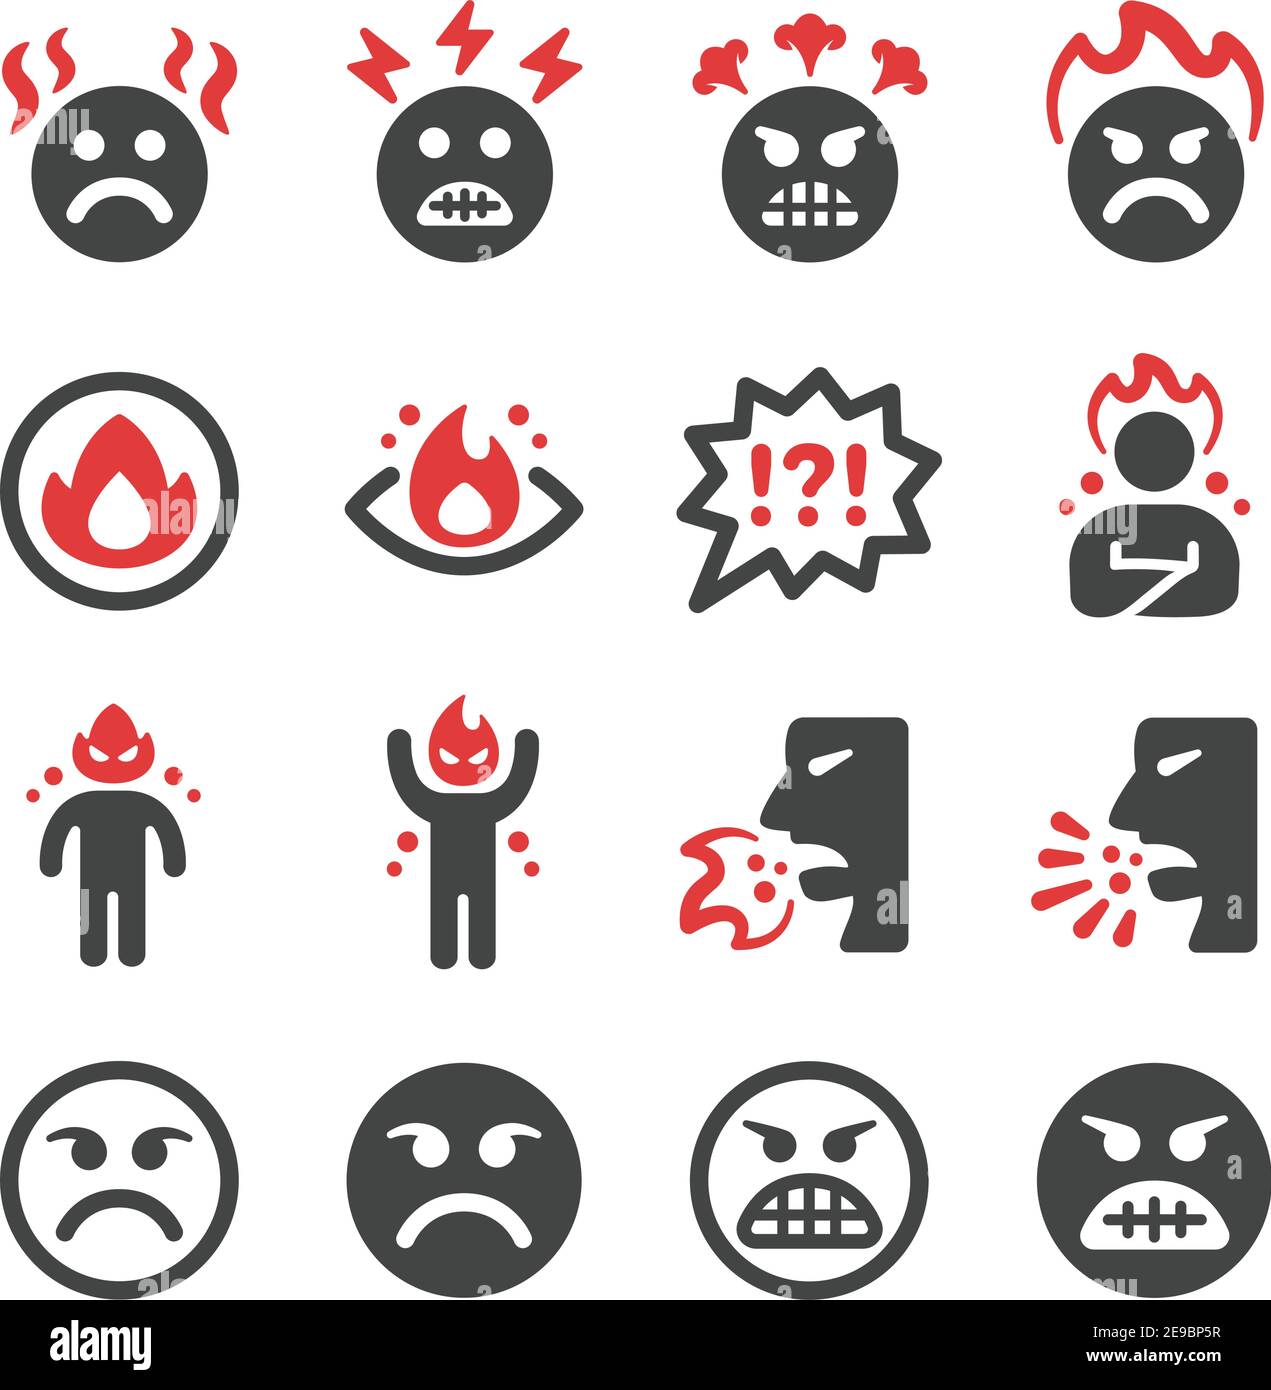 angry emotion icon set,vector and illustration Stock Vector